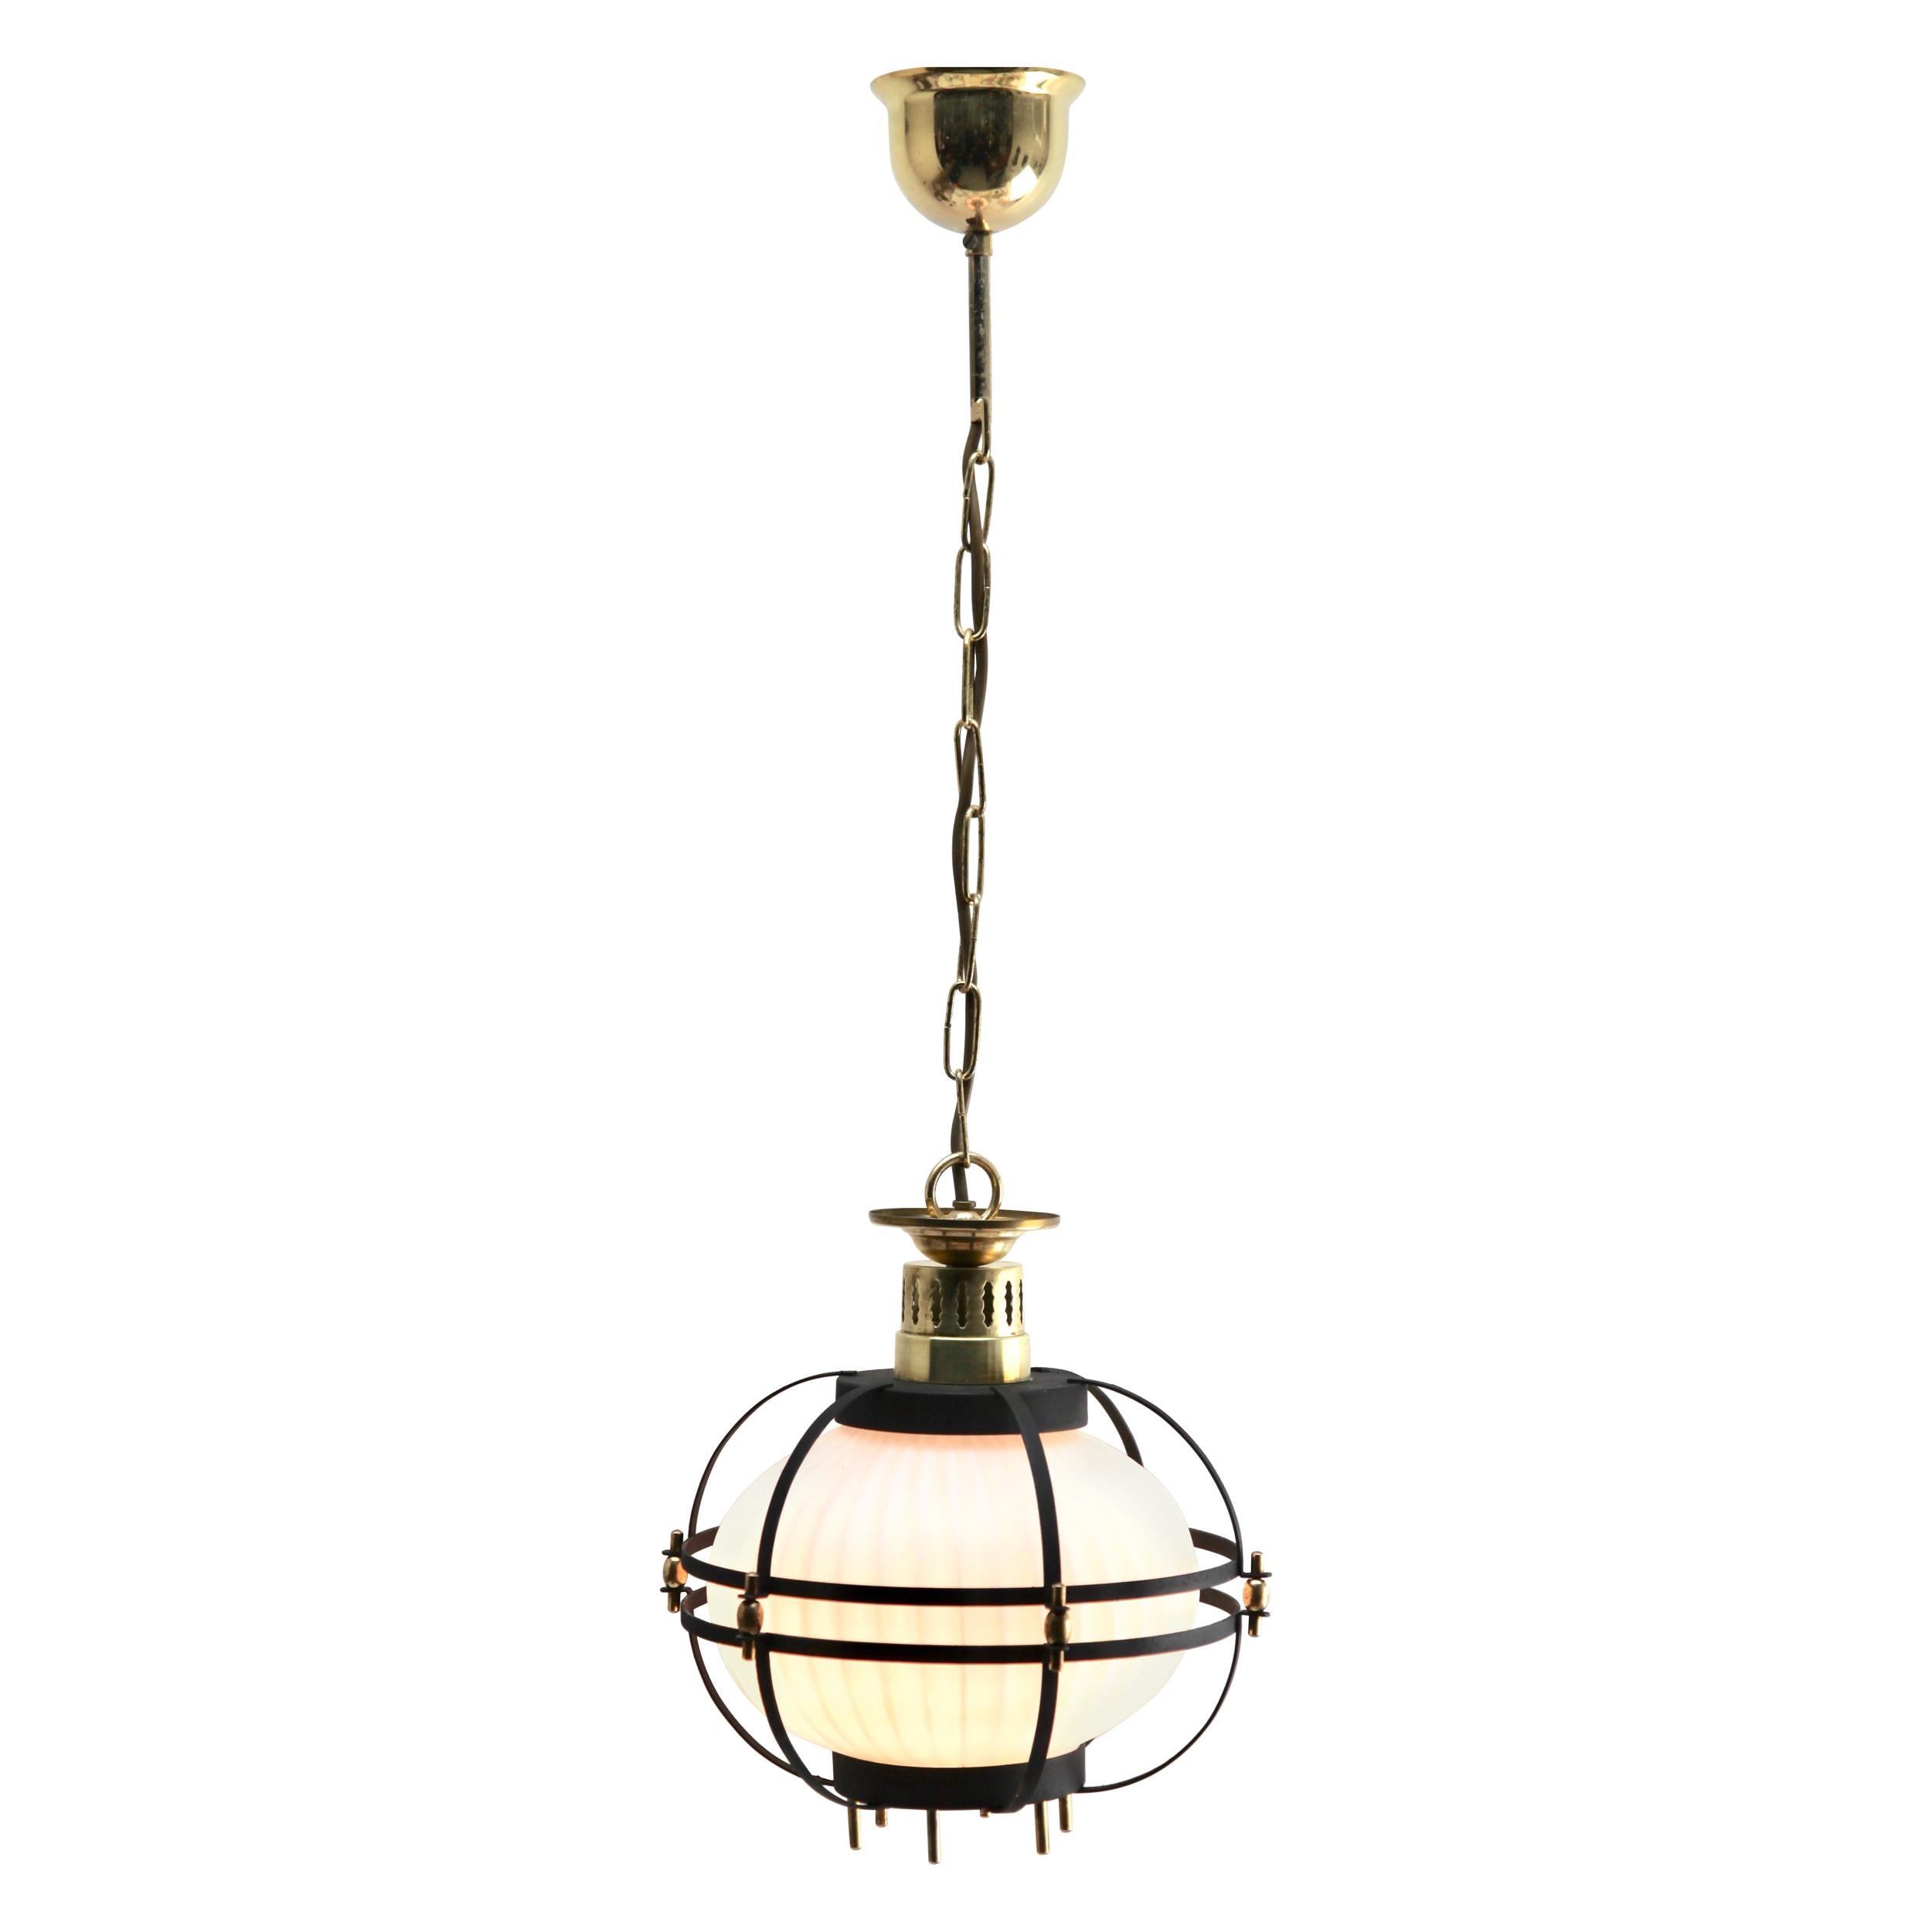 Midcentury Pendant Lobby Light Forget Metal and Opaline Lampshade